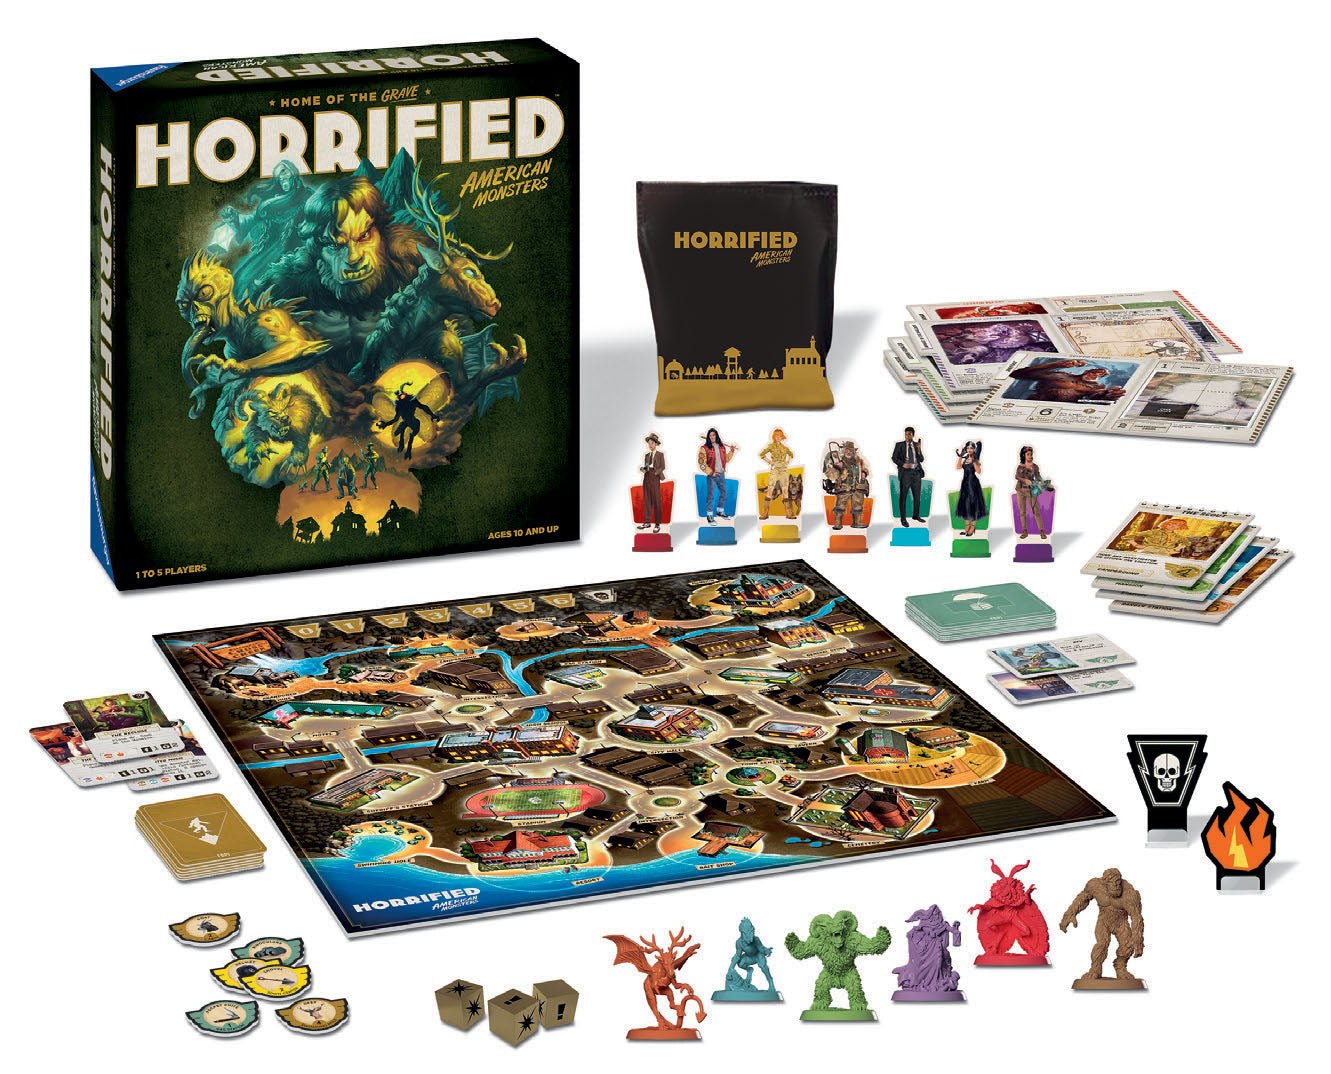 Horrified: American Monsters - The Fourth Place